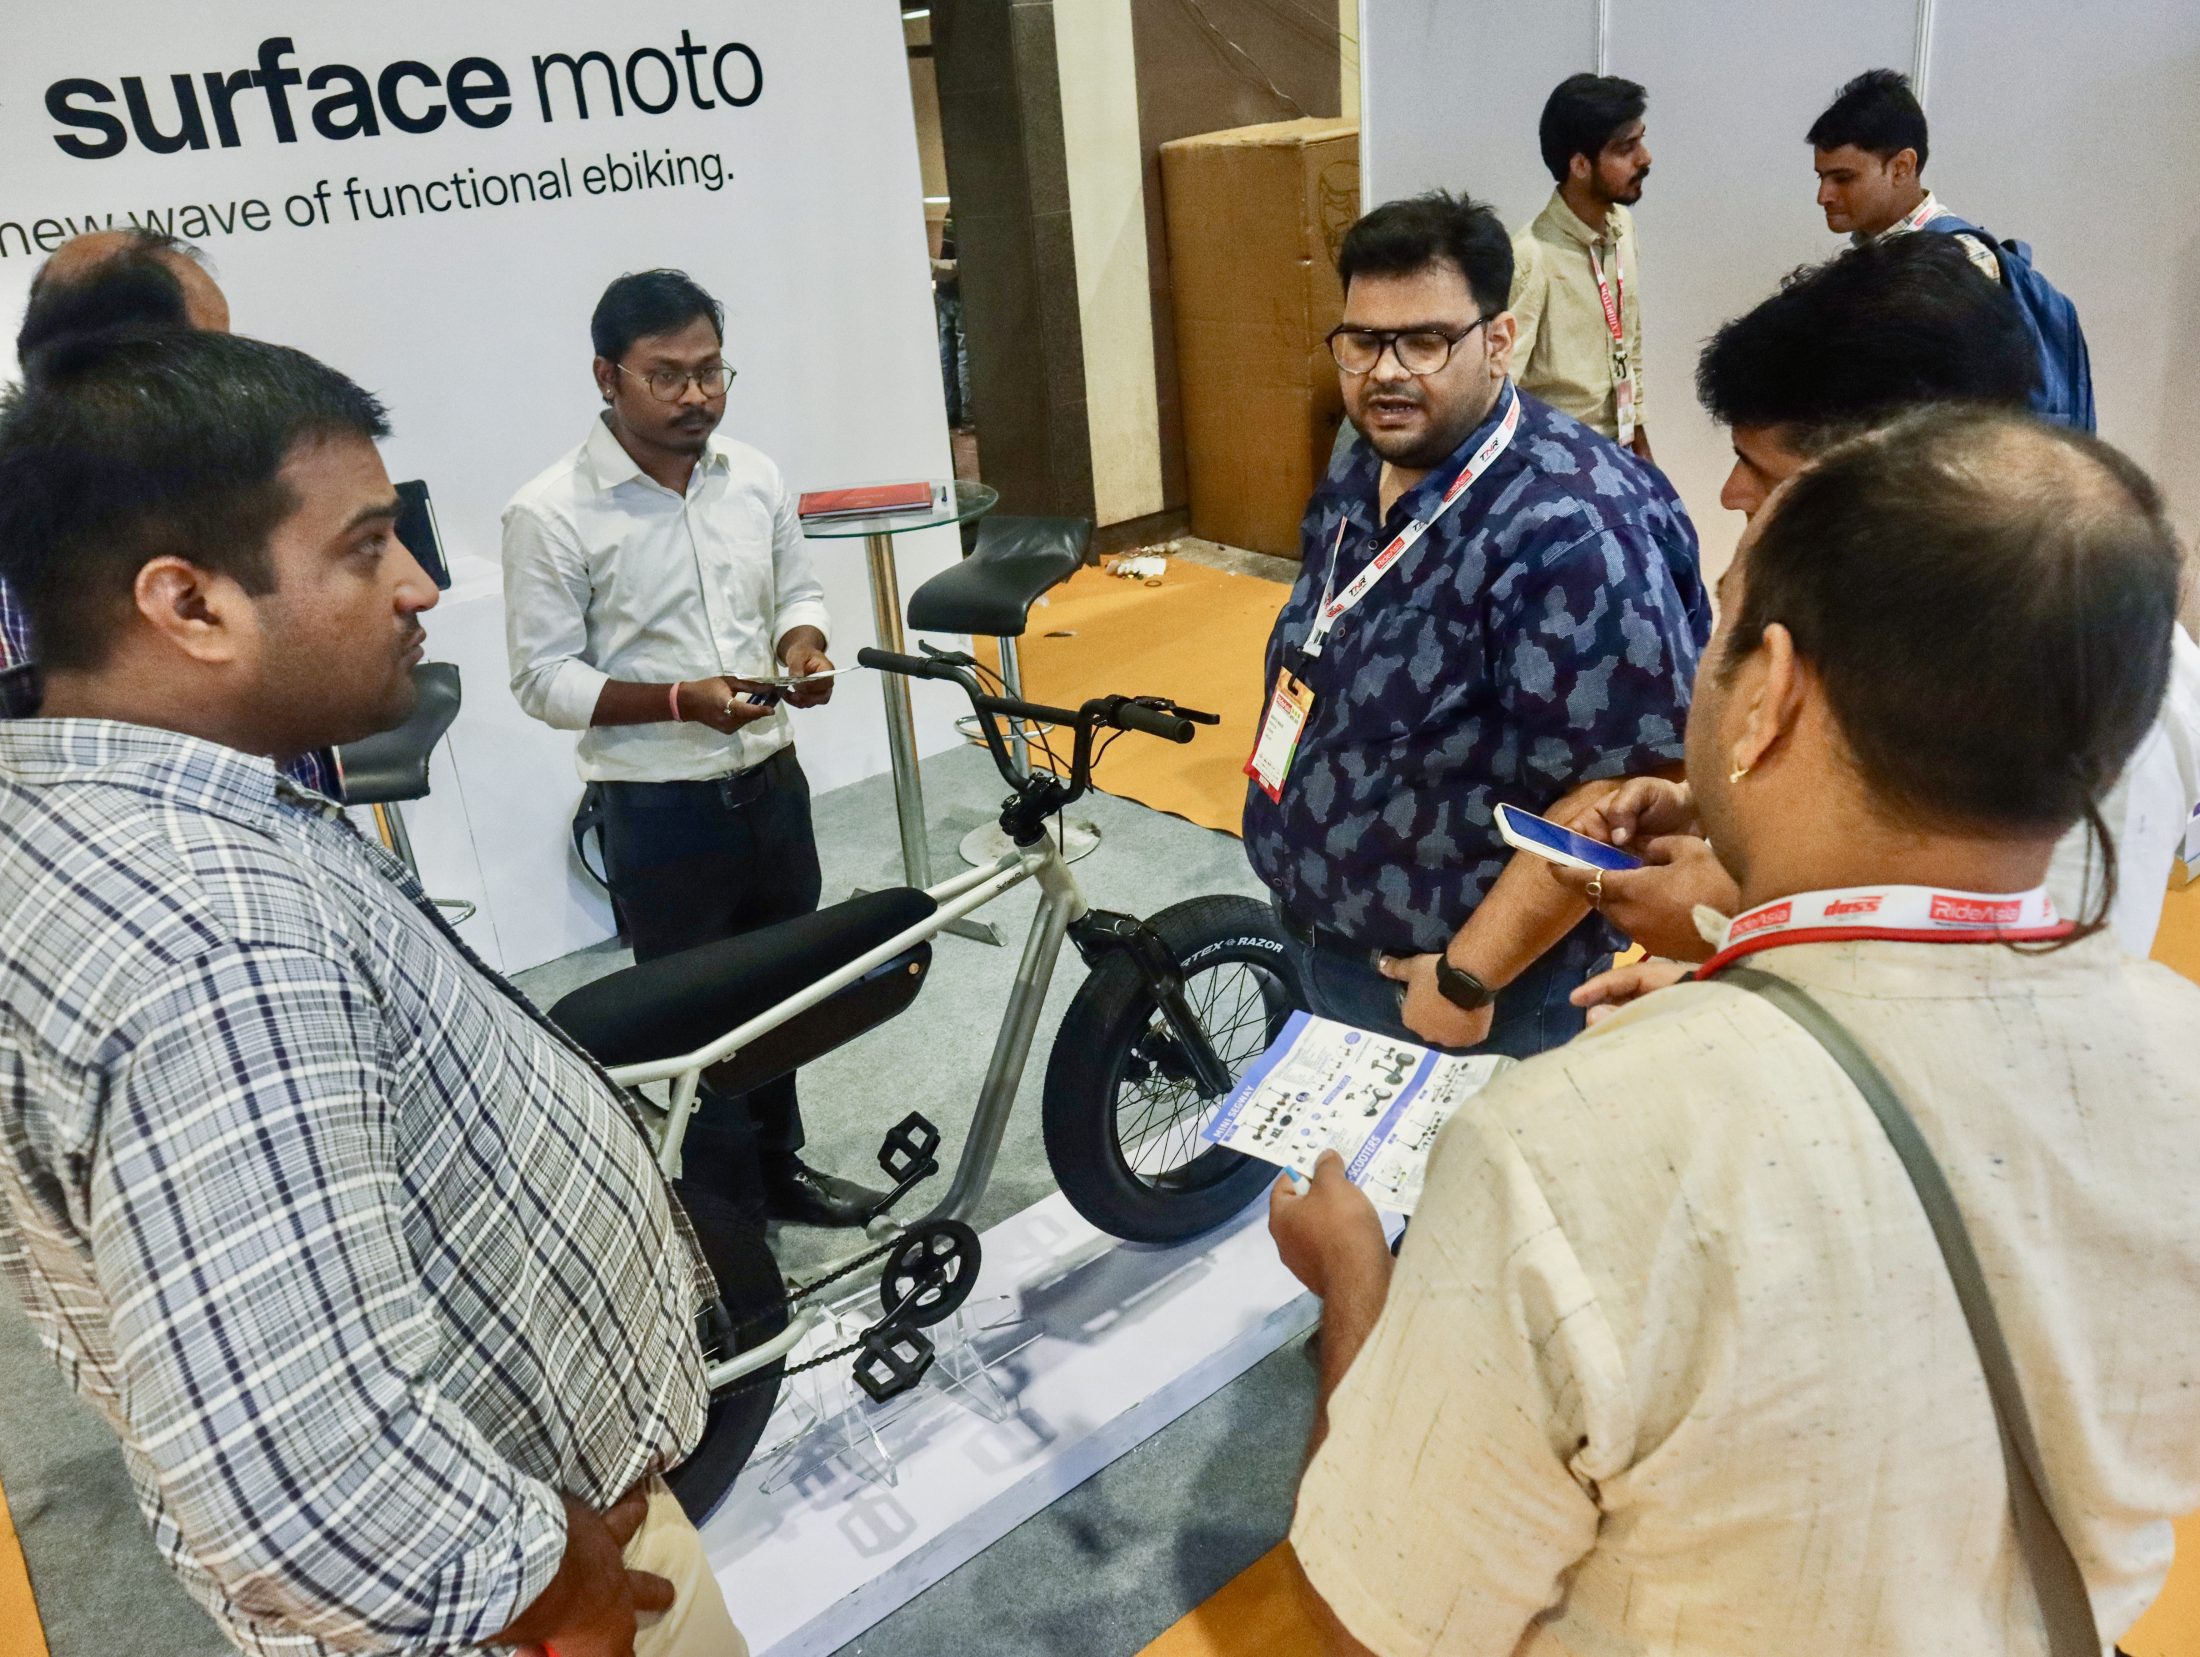 https://e-vehicleinfo.com/iit-delhi-backed-micro-ev-startup-surface-moto-launches-surface-c1-electric-bicycle/